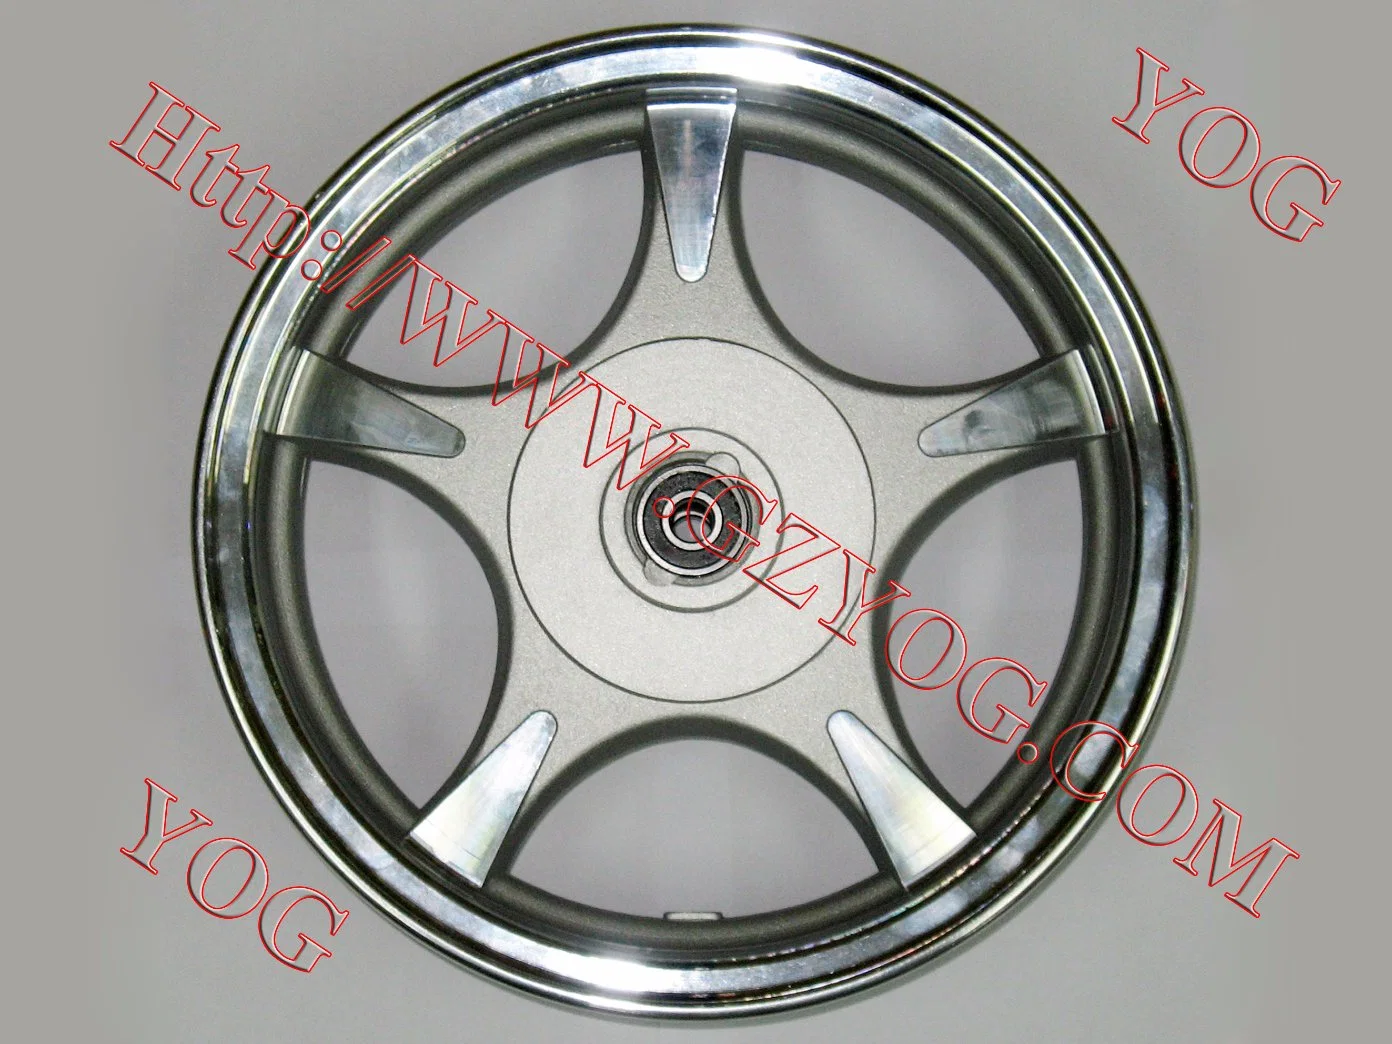 Yog Spare Parts Motorcycle Aluminum Rim Complete Alloy Wheel for Gy6-50/Wy